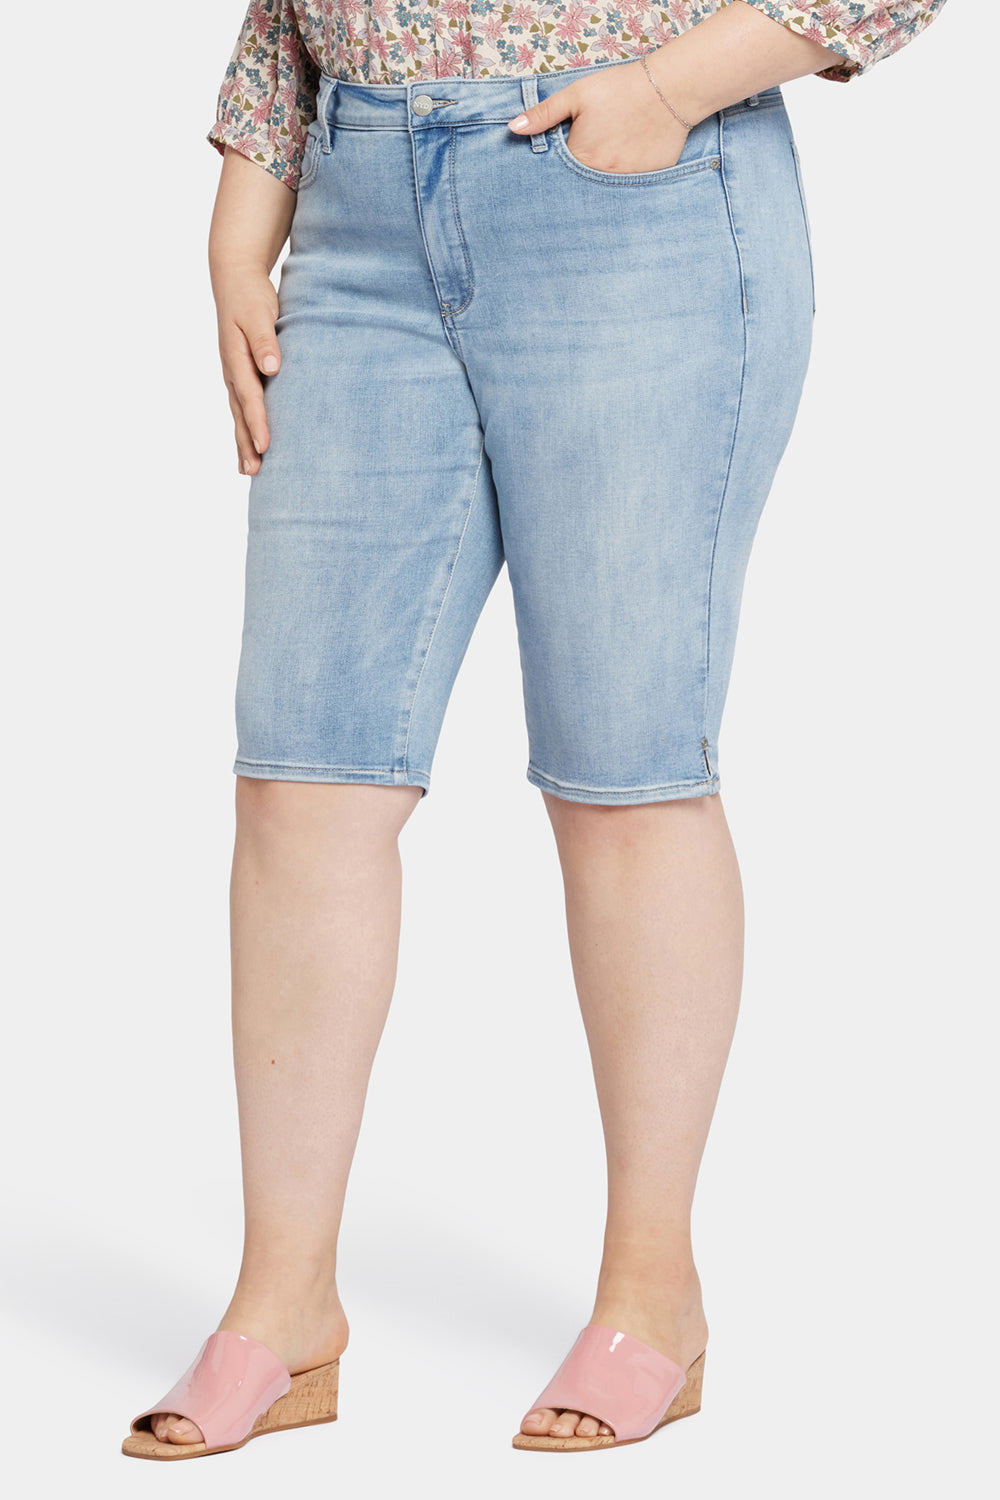 NYDJ Bike Capri Jeans In Plus Size With Riveted Side Slits - Afterglow